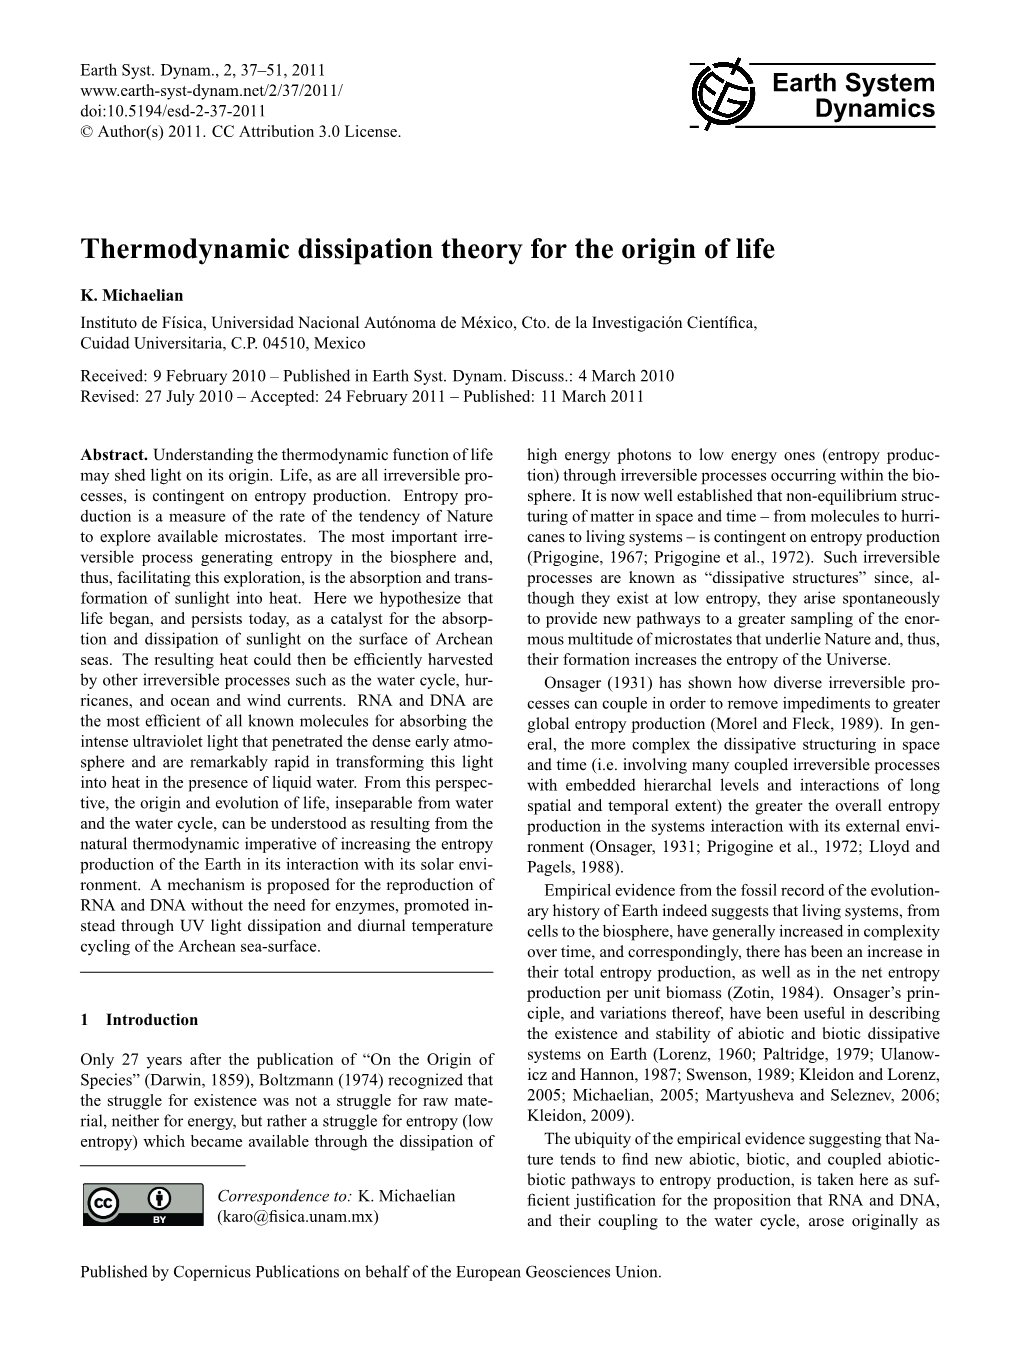 Thermodynamic Dissipation Theory for the Origin of Life